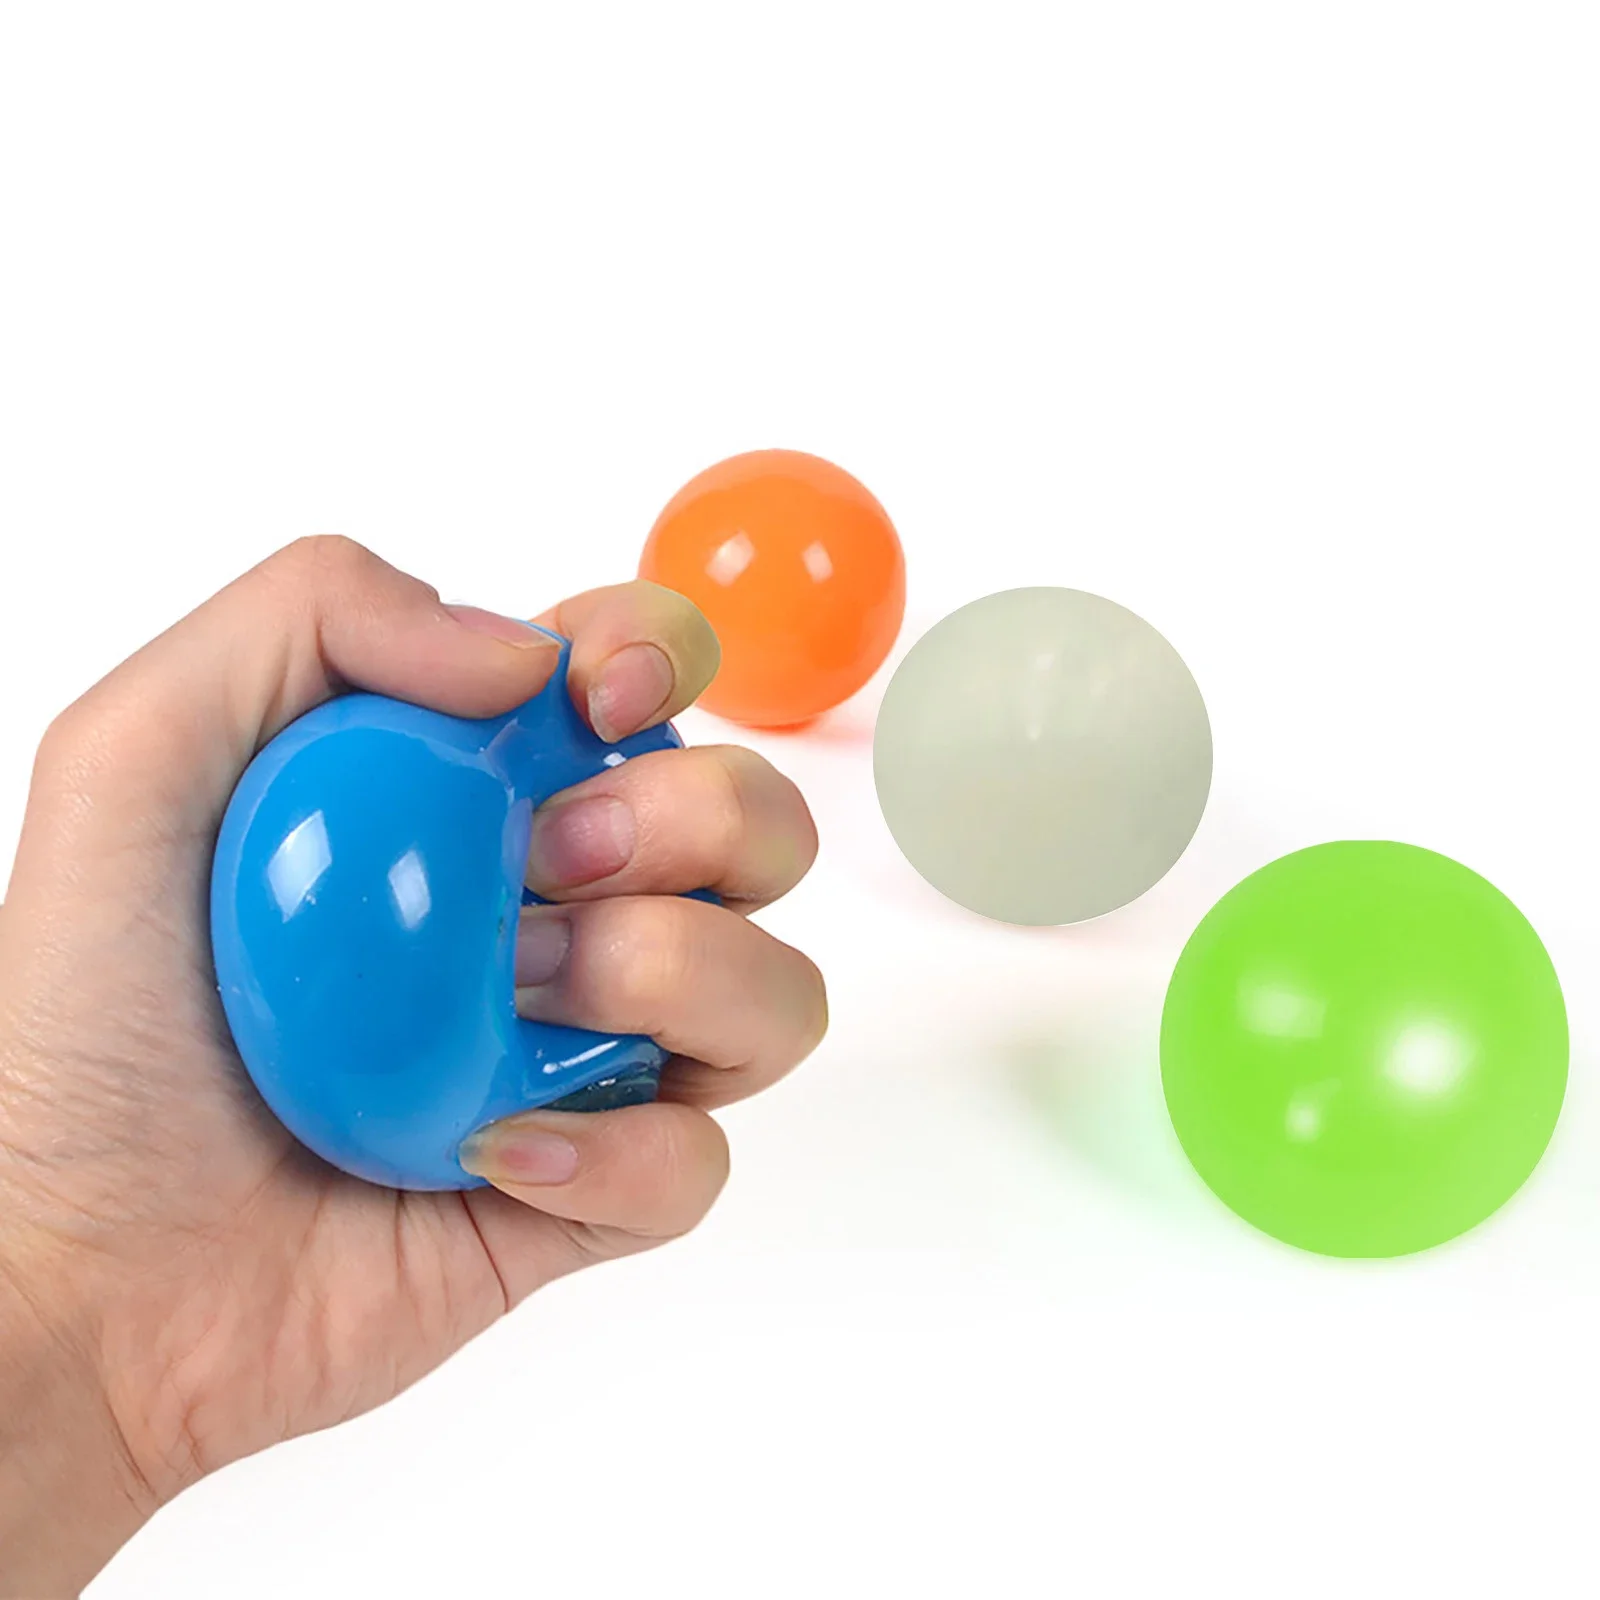 Fidget Toys Anti Stress Set Stretchy Strings Stress Ball Gift Pack Adults Children Squishy Sensory Antistress Relief Figet Toys enlarge